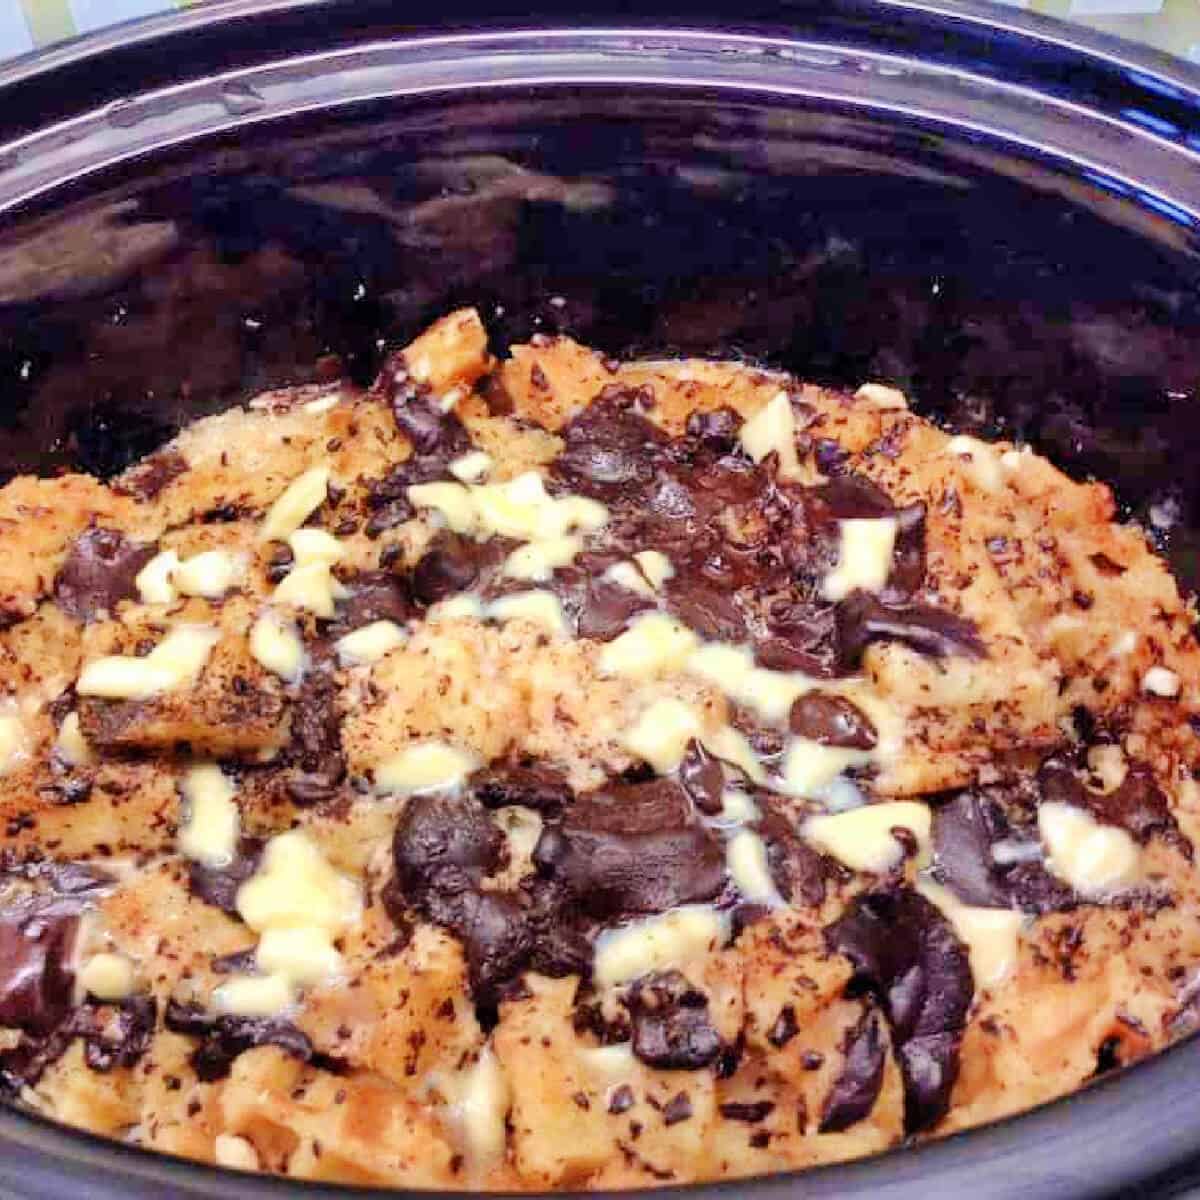 Chocolate pudding with baked waffles in slow cooker pot.